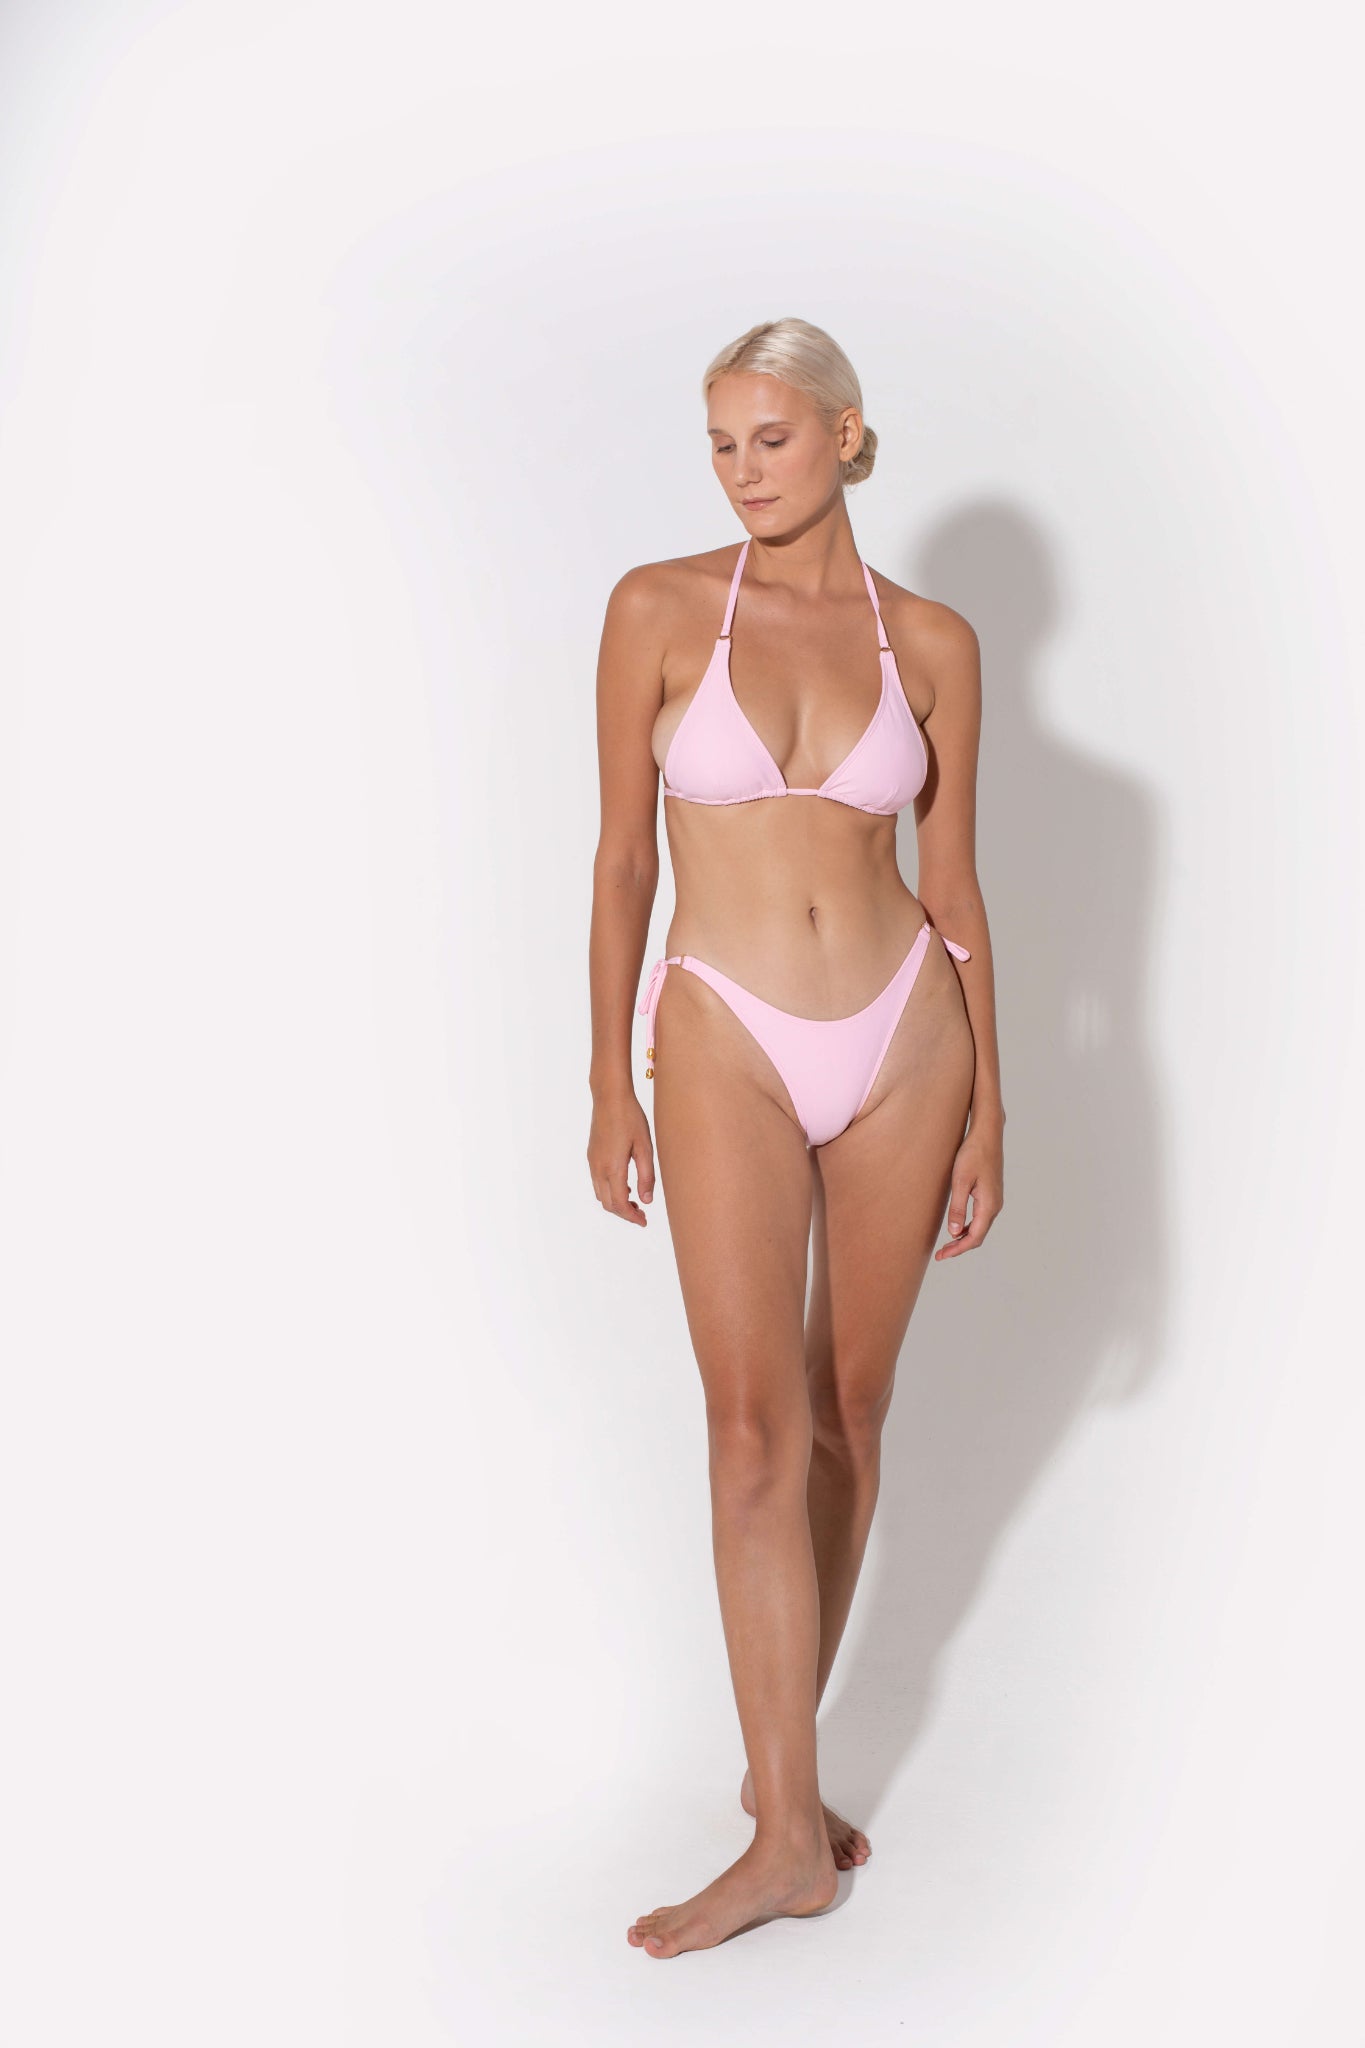 comfortable high quality swimwear bikini bottoms in pink, low waist briefs in soft color